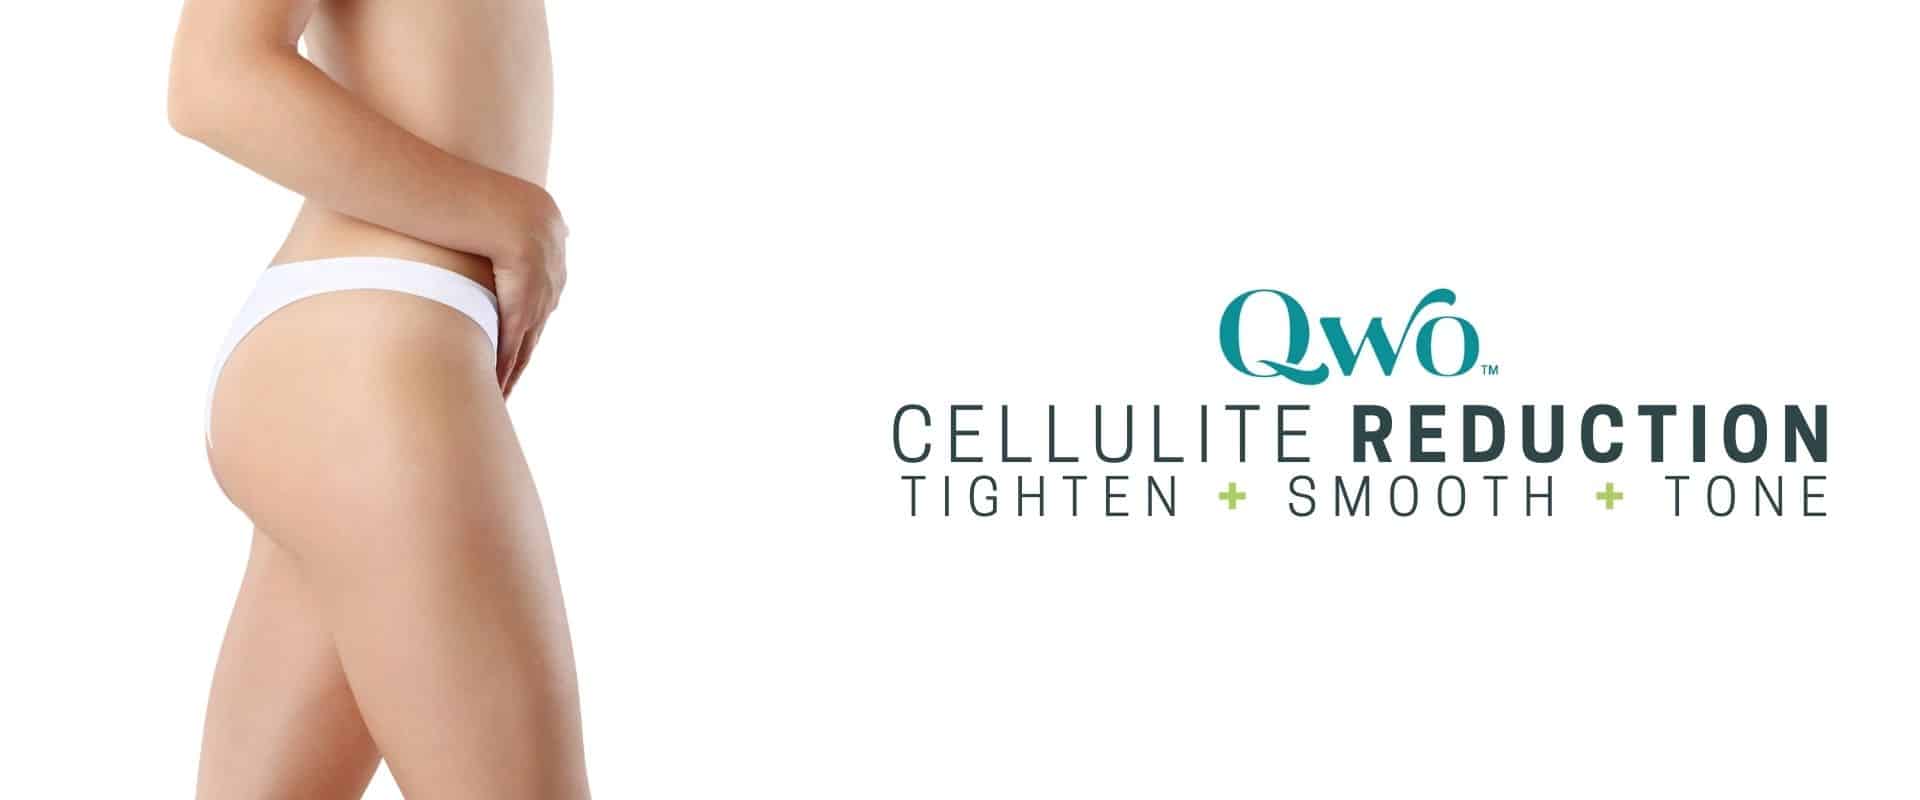 Perfect female buttocks without cellulite promoting qwo cellulite treatment in Los Angelas at Sculpt DTLA.